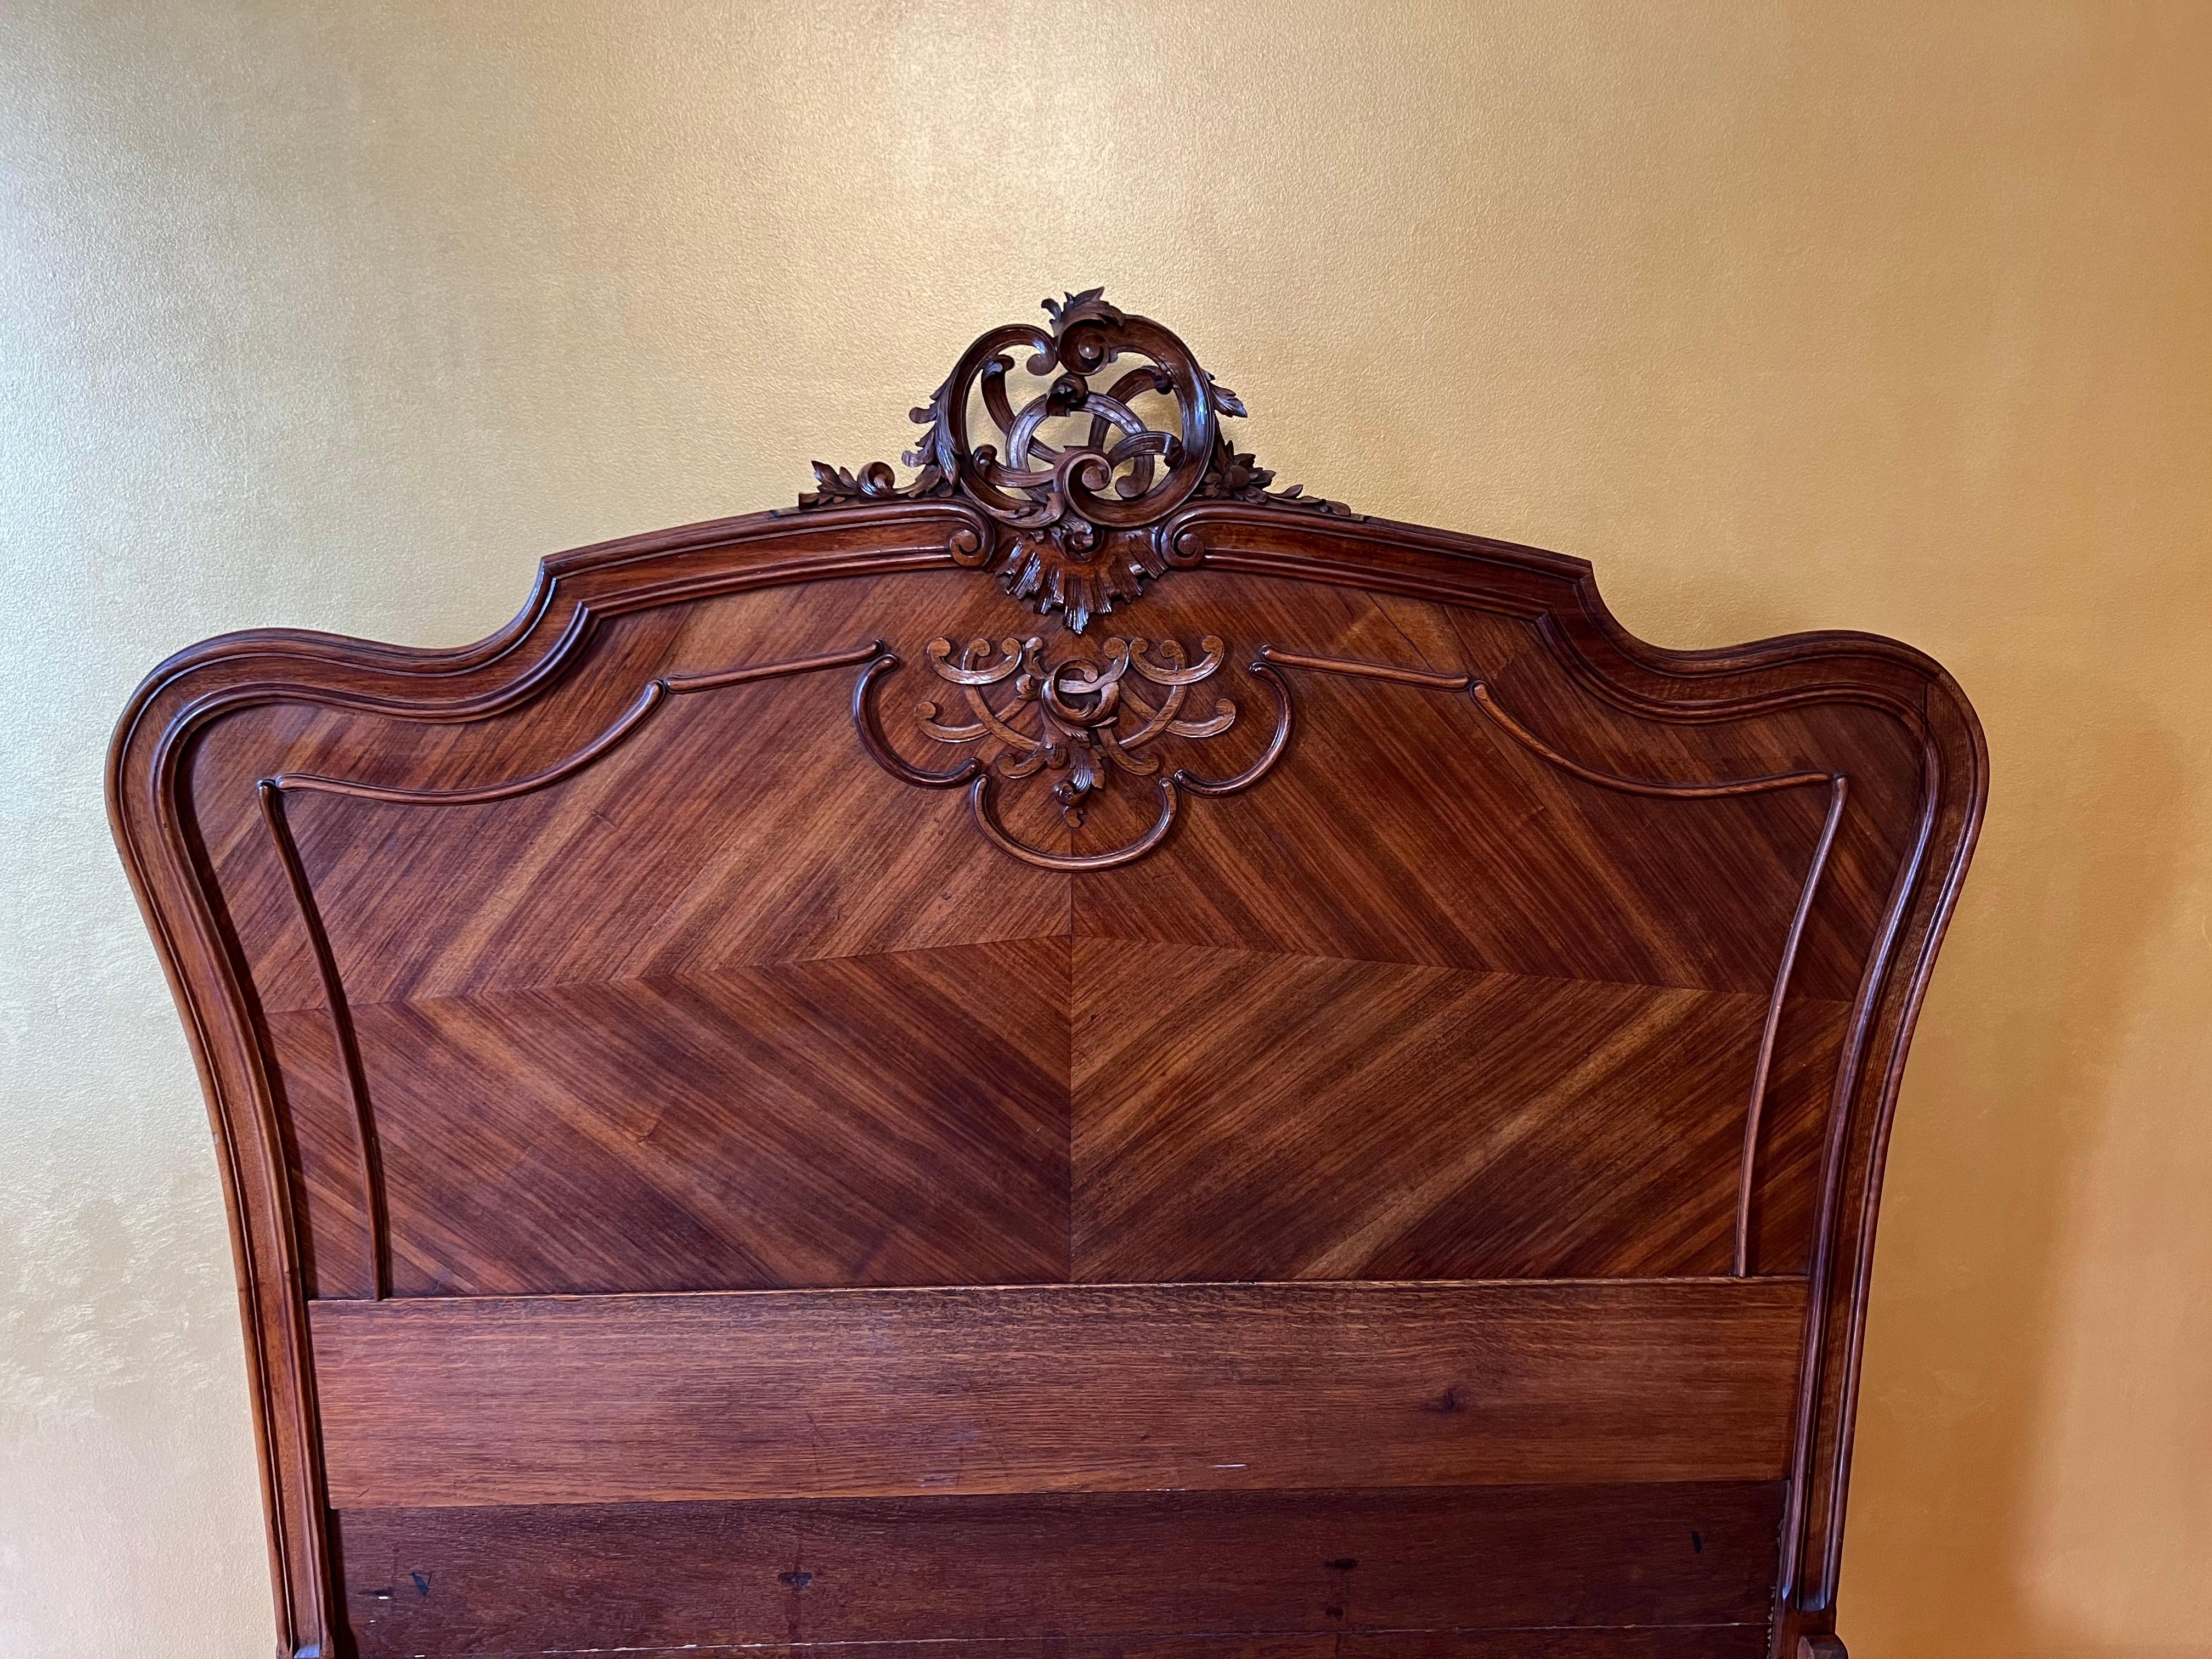 Spiral carving cutout detail to centre headboard, similar detailing to front headboard, turned shaped legs and carvings, checker design in wood on both front and back headboard, comes with slats. 

Size: Double Size

Circa: 19th Century

Material: